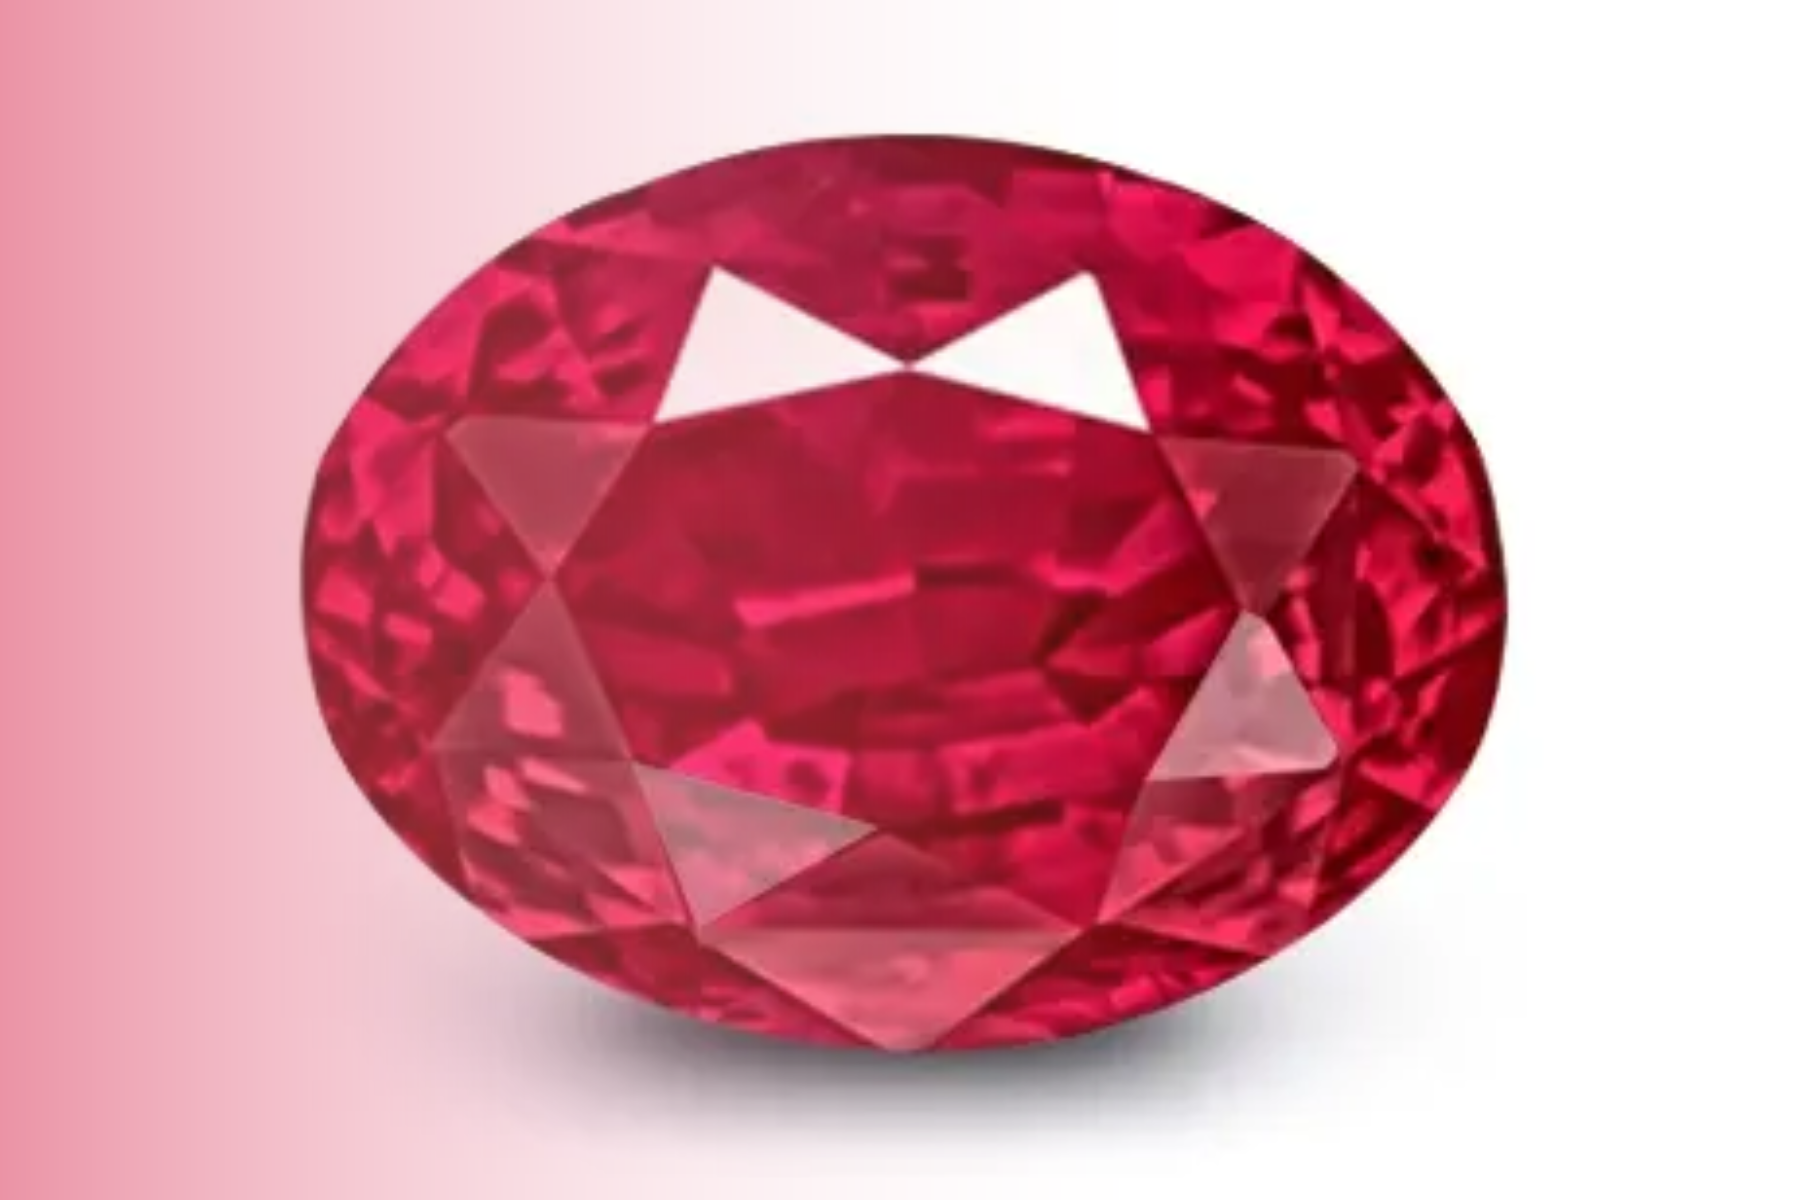 Bright red ruby stone